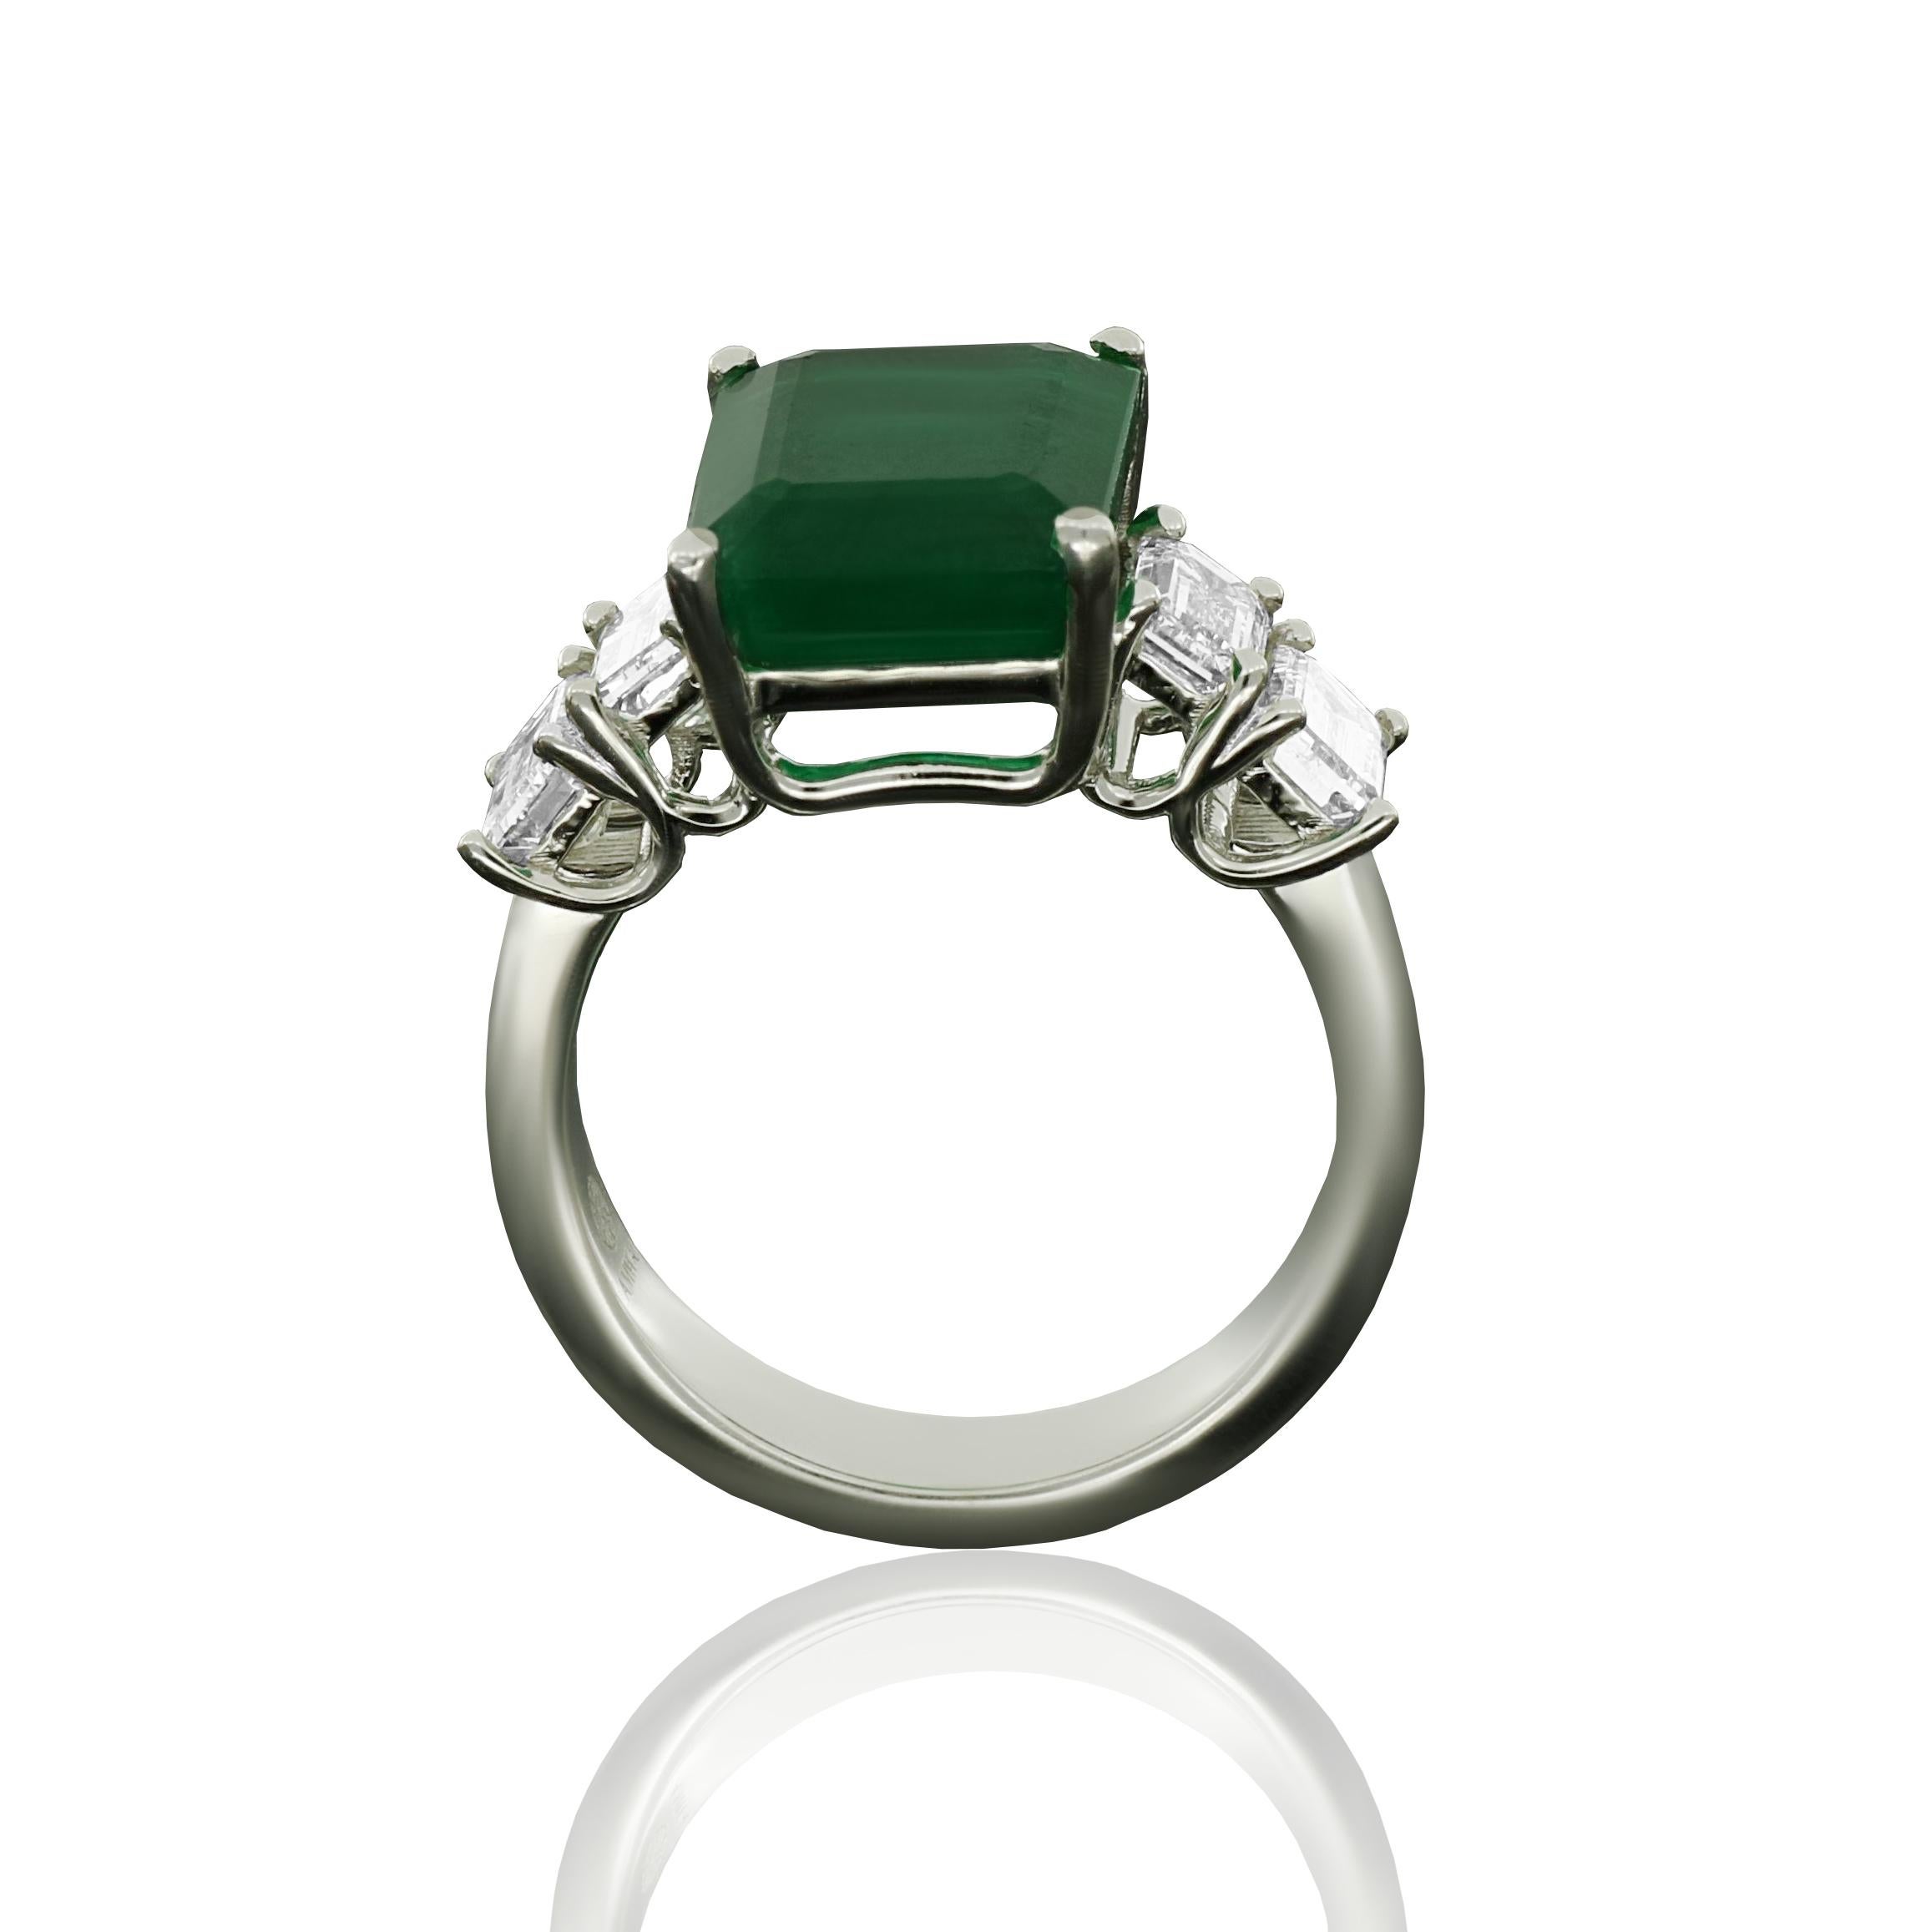 A contemporary 18 karat white gold ring featuring emerald cut white diamonds with a total weight of 1.59 carats, centralized by 5.53 carat emerald cut emerald. 
Diamonds (Total Carat Weight: 1.59 ct)
18 Karat White Gold
Ring Size: 52, 12, 6
]Diamond